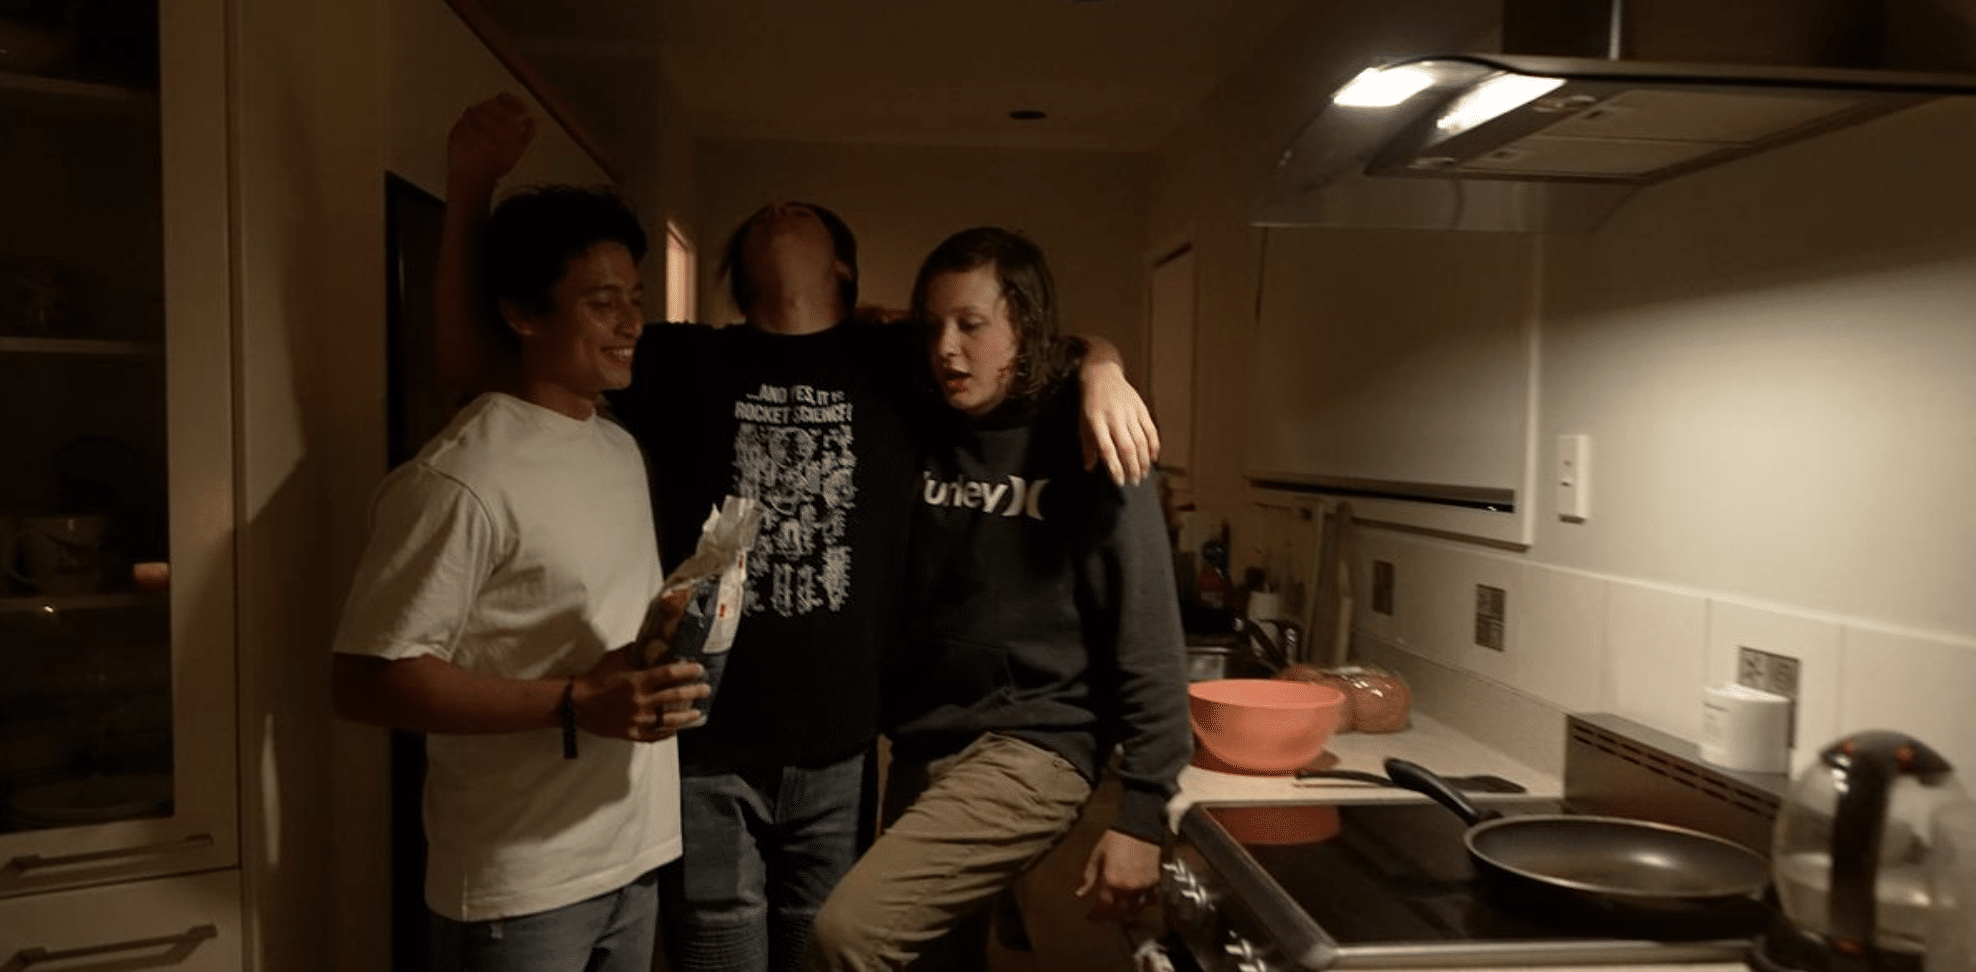 Three male young adults are drinking alcohol in a kitchen. Still image from 'The After Party' - an interactive social awareness campaign